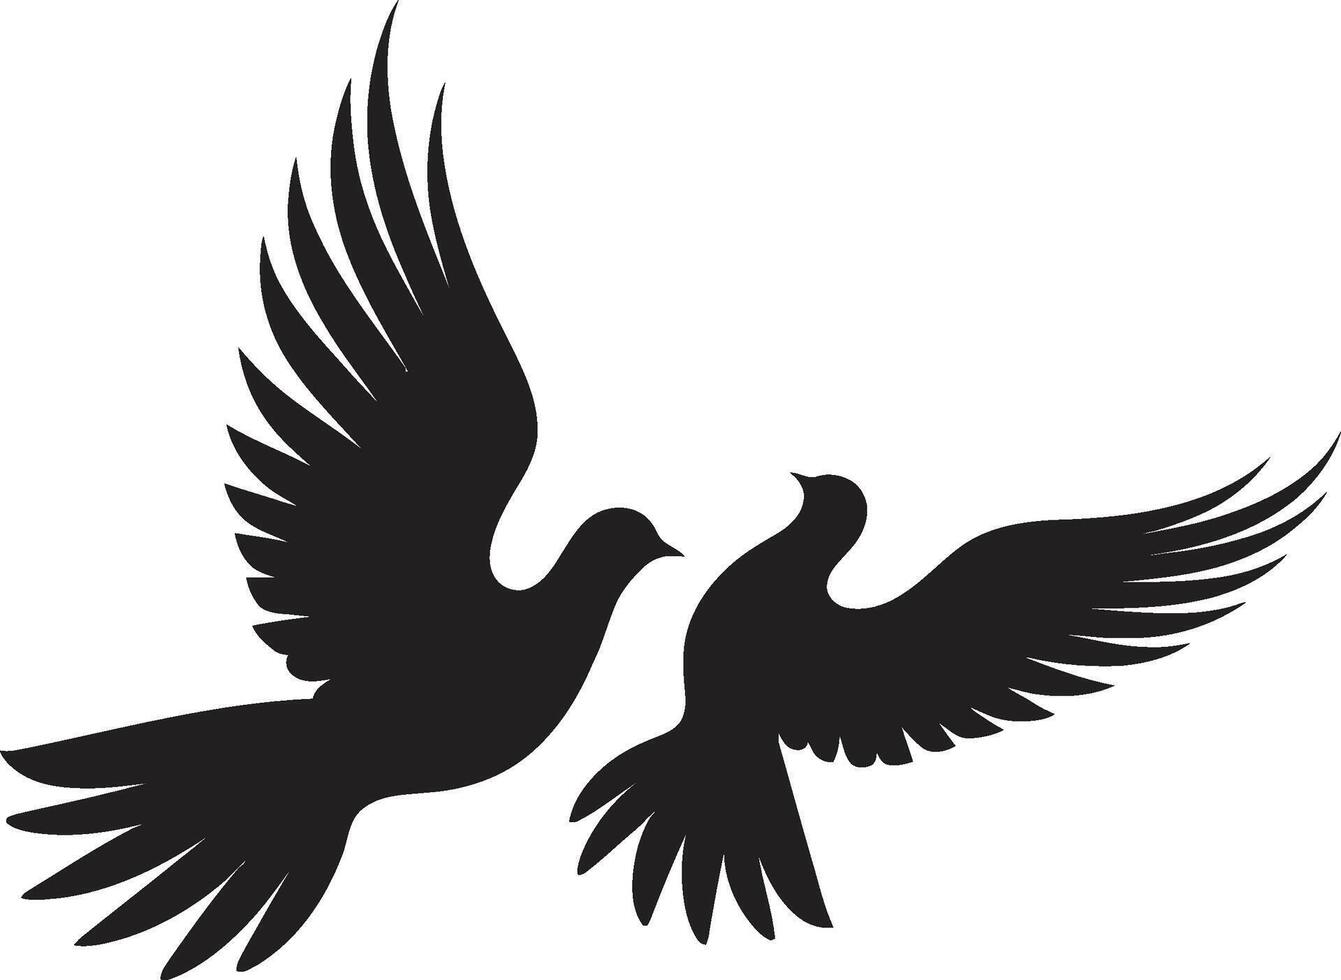 Harmony in Motion Emblem of a Dove Pair Winged Unity Dove Pair vector